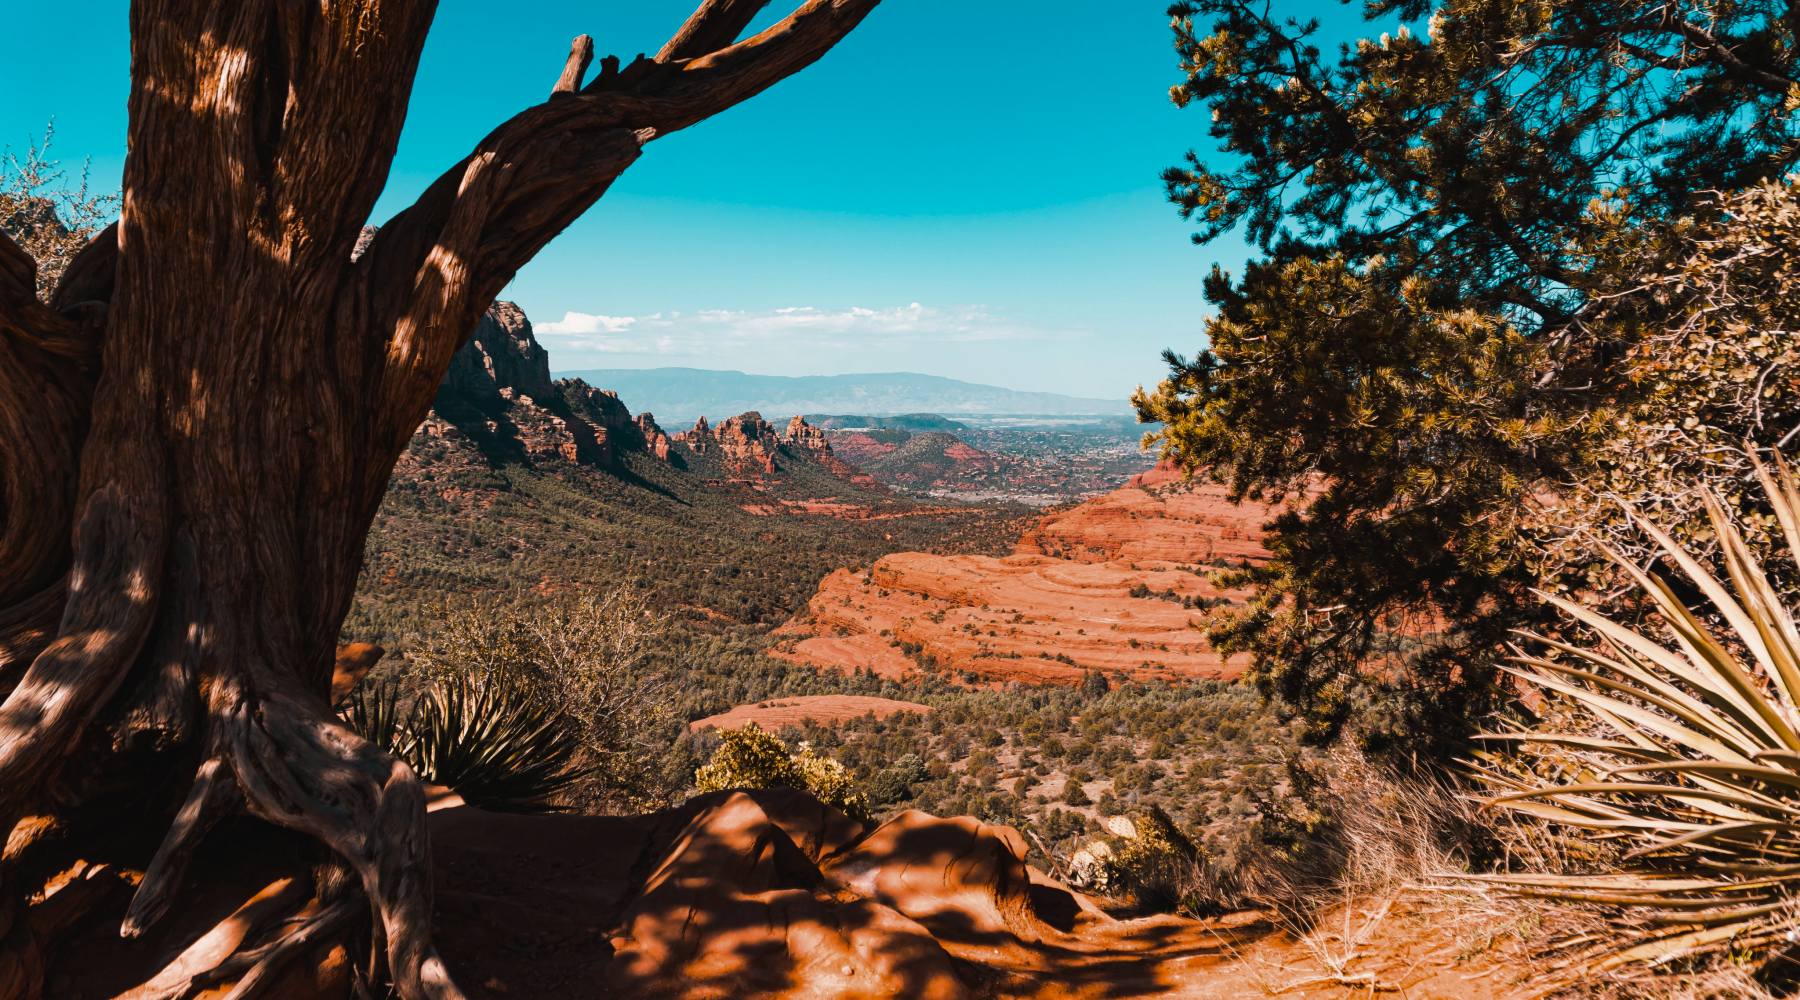 Long distance view of Sedona Arizona.  Foreground shows a Yucca plant and pine tree in red soil.